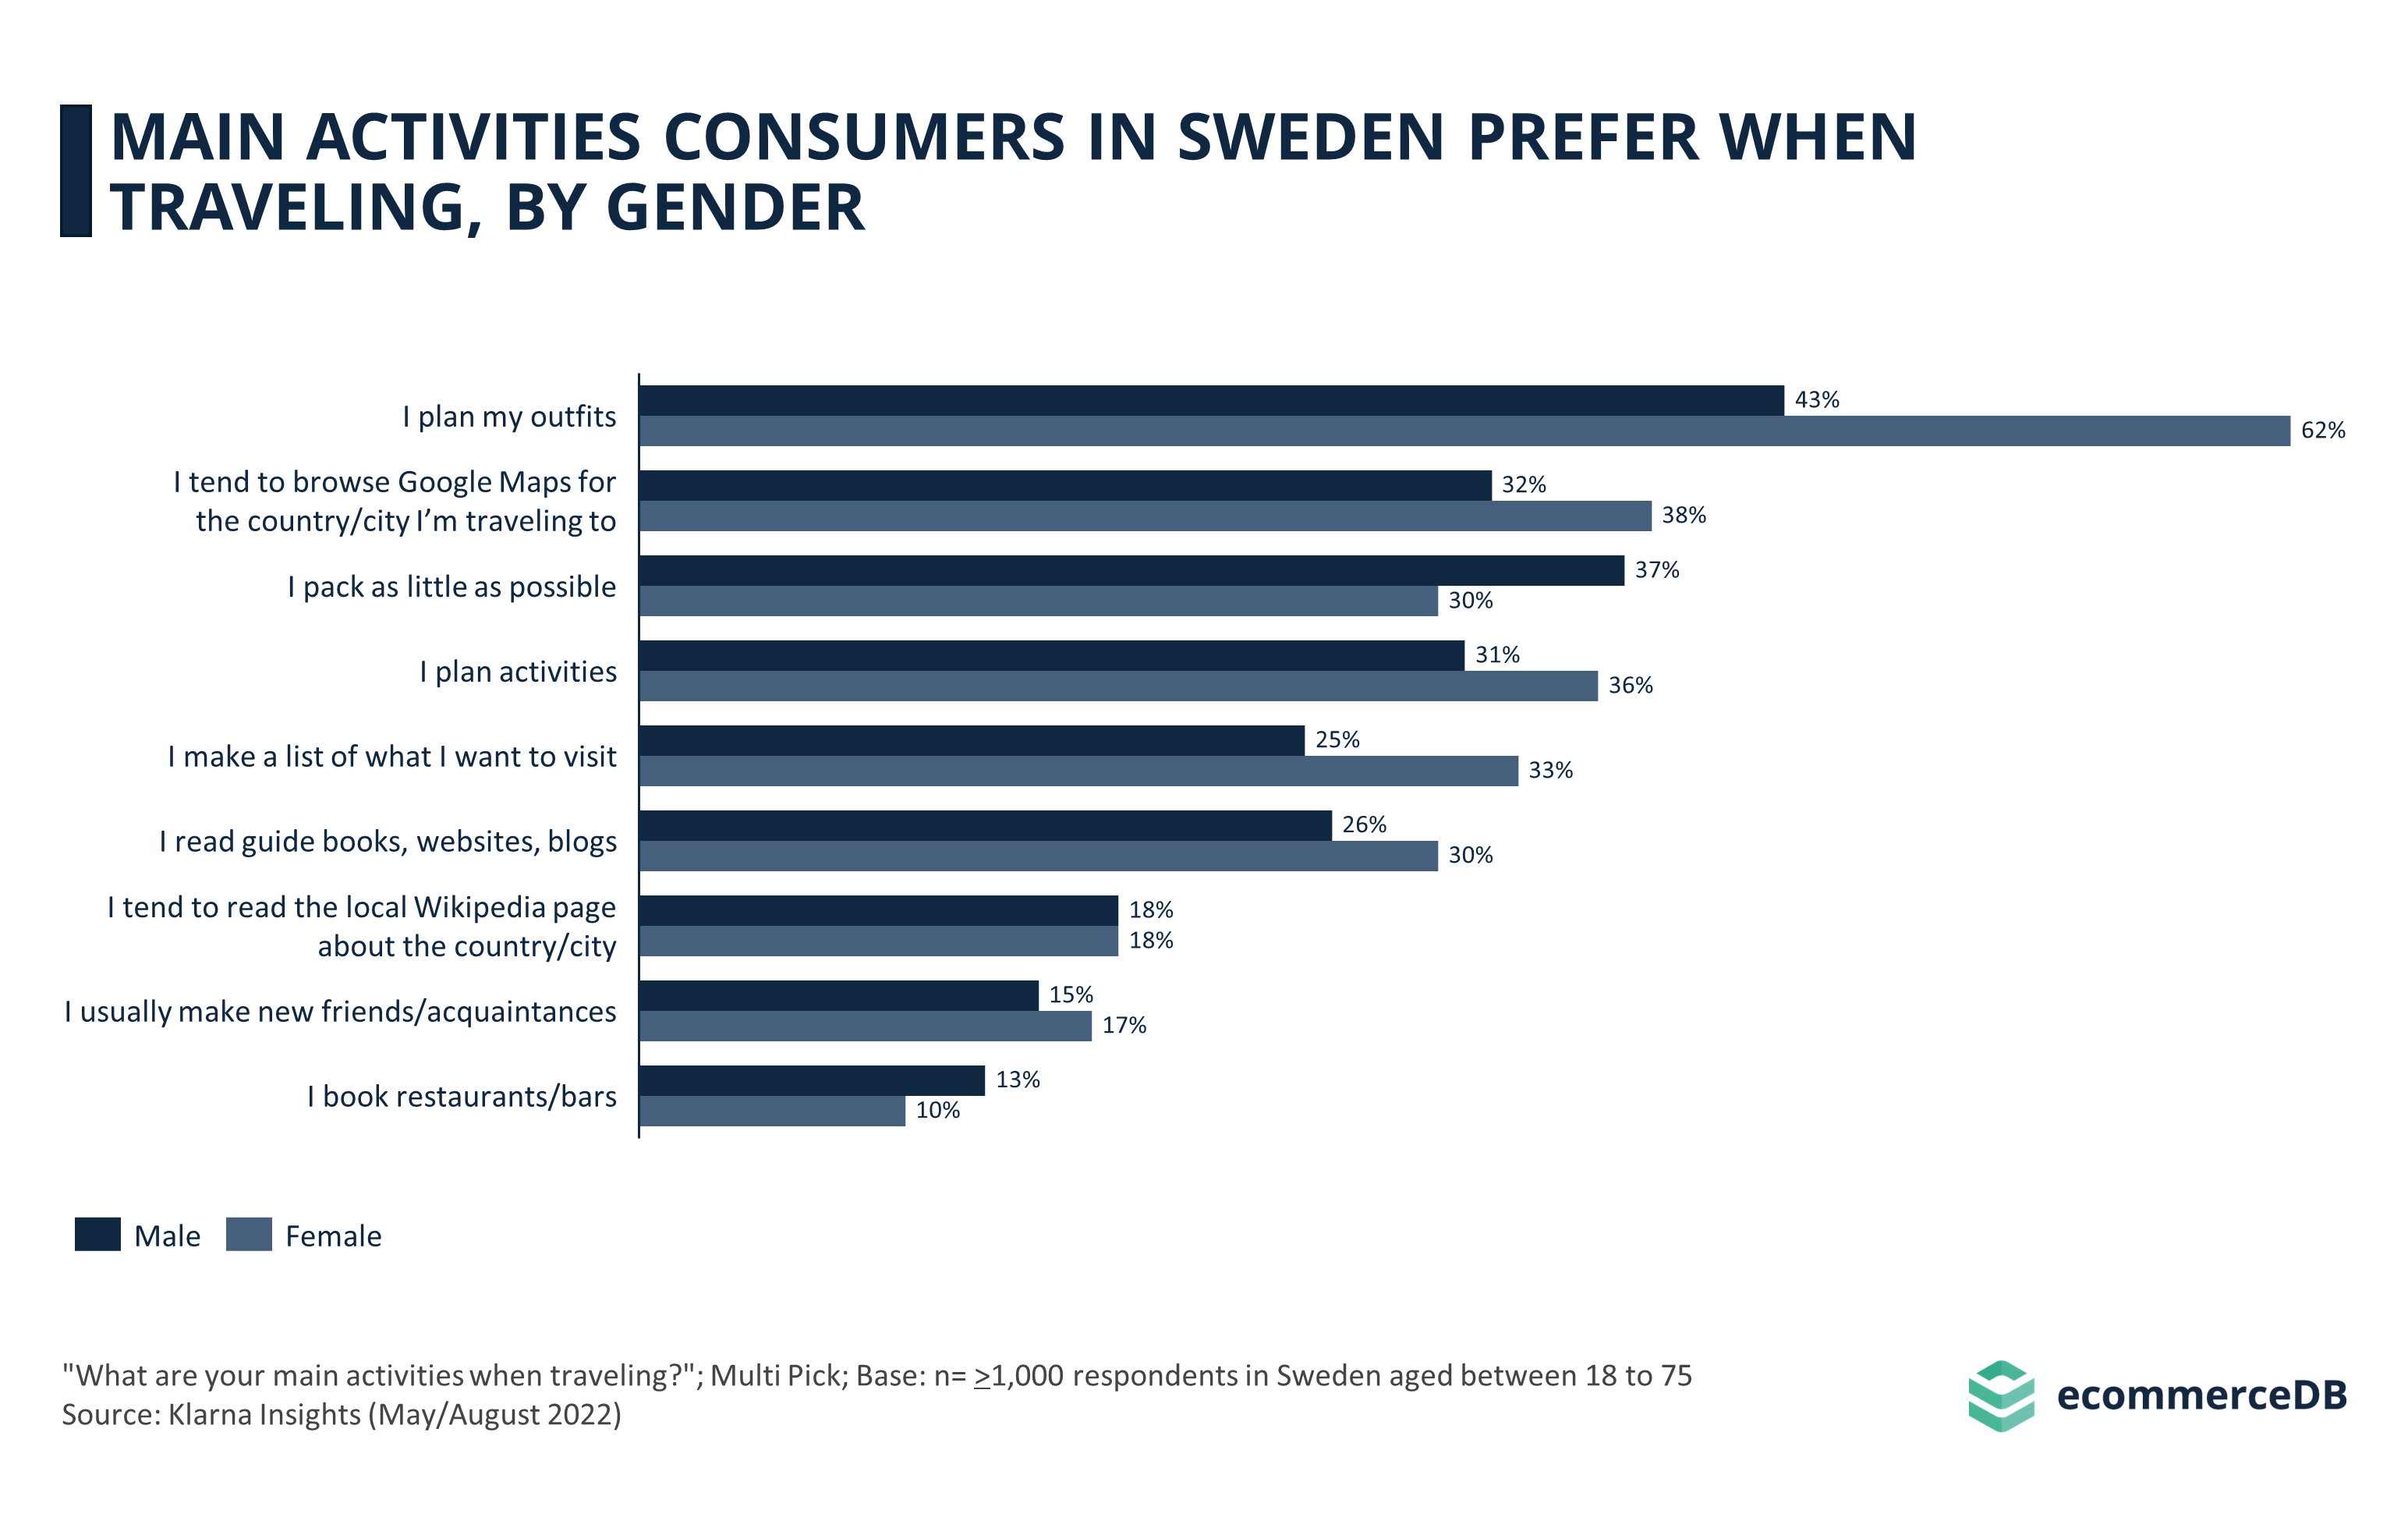 Main Activities Consumers in Sweden Prefer When Traveling, by Gender